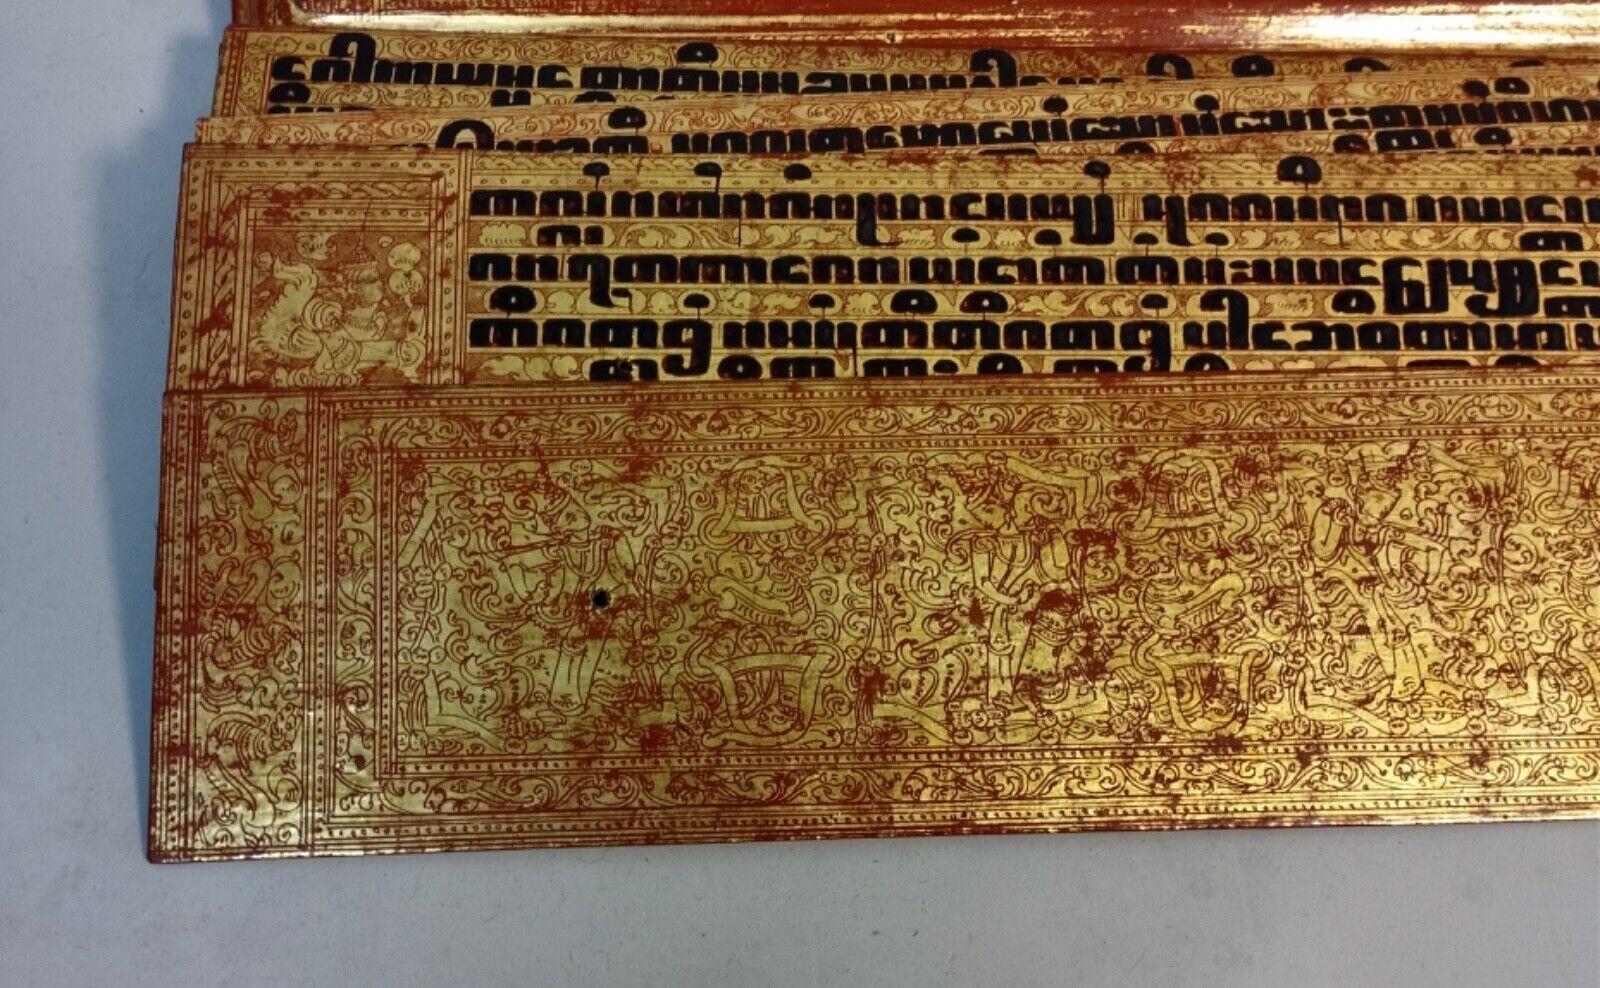 Introducing an Exquisite and Rare Gilded Buddhist Manuscript

This remarkable piece presents a truly exceptional find—a gilded Buddhist manuscript of immense beauty and rarity. The manuscript features exquisitely decorated wooden covers on both